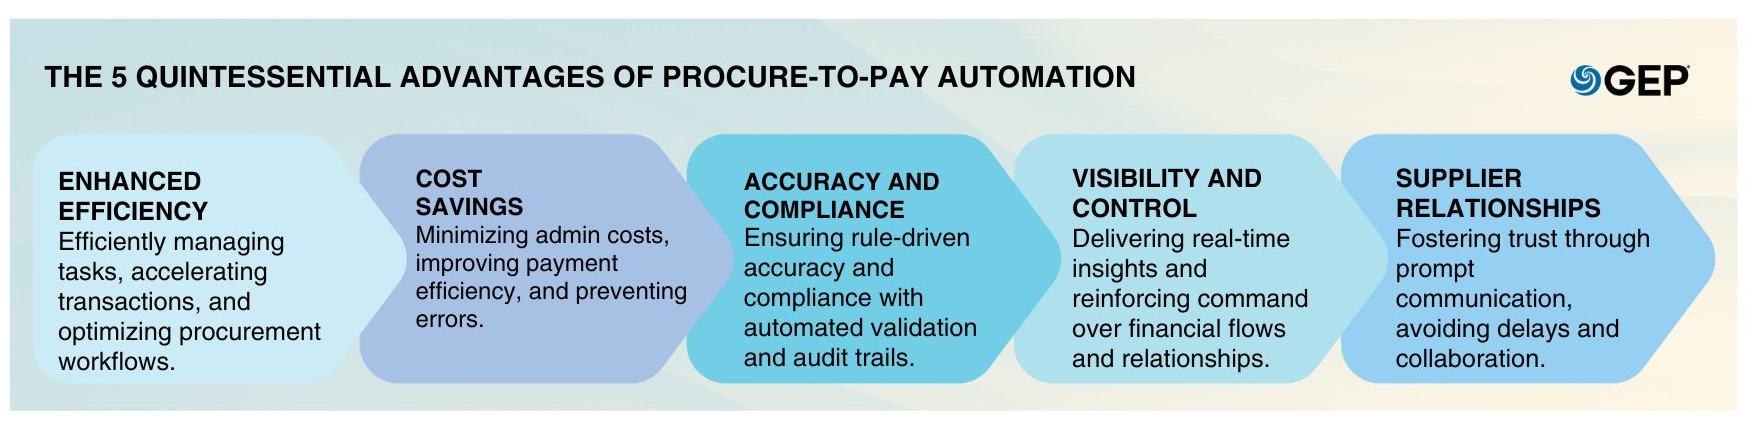 5-key-benefits-of-procure-to-pay-automation_0